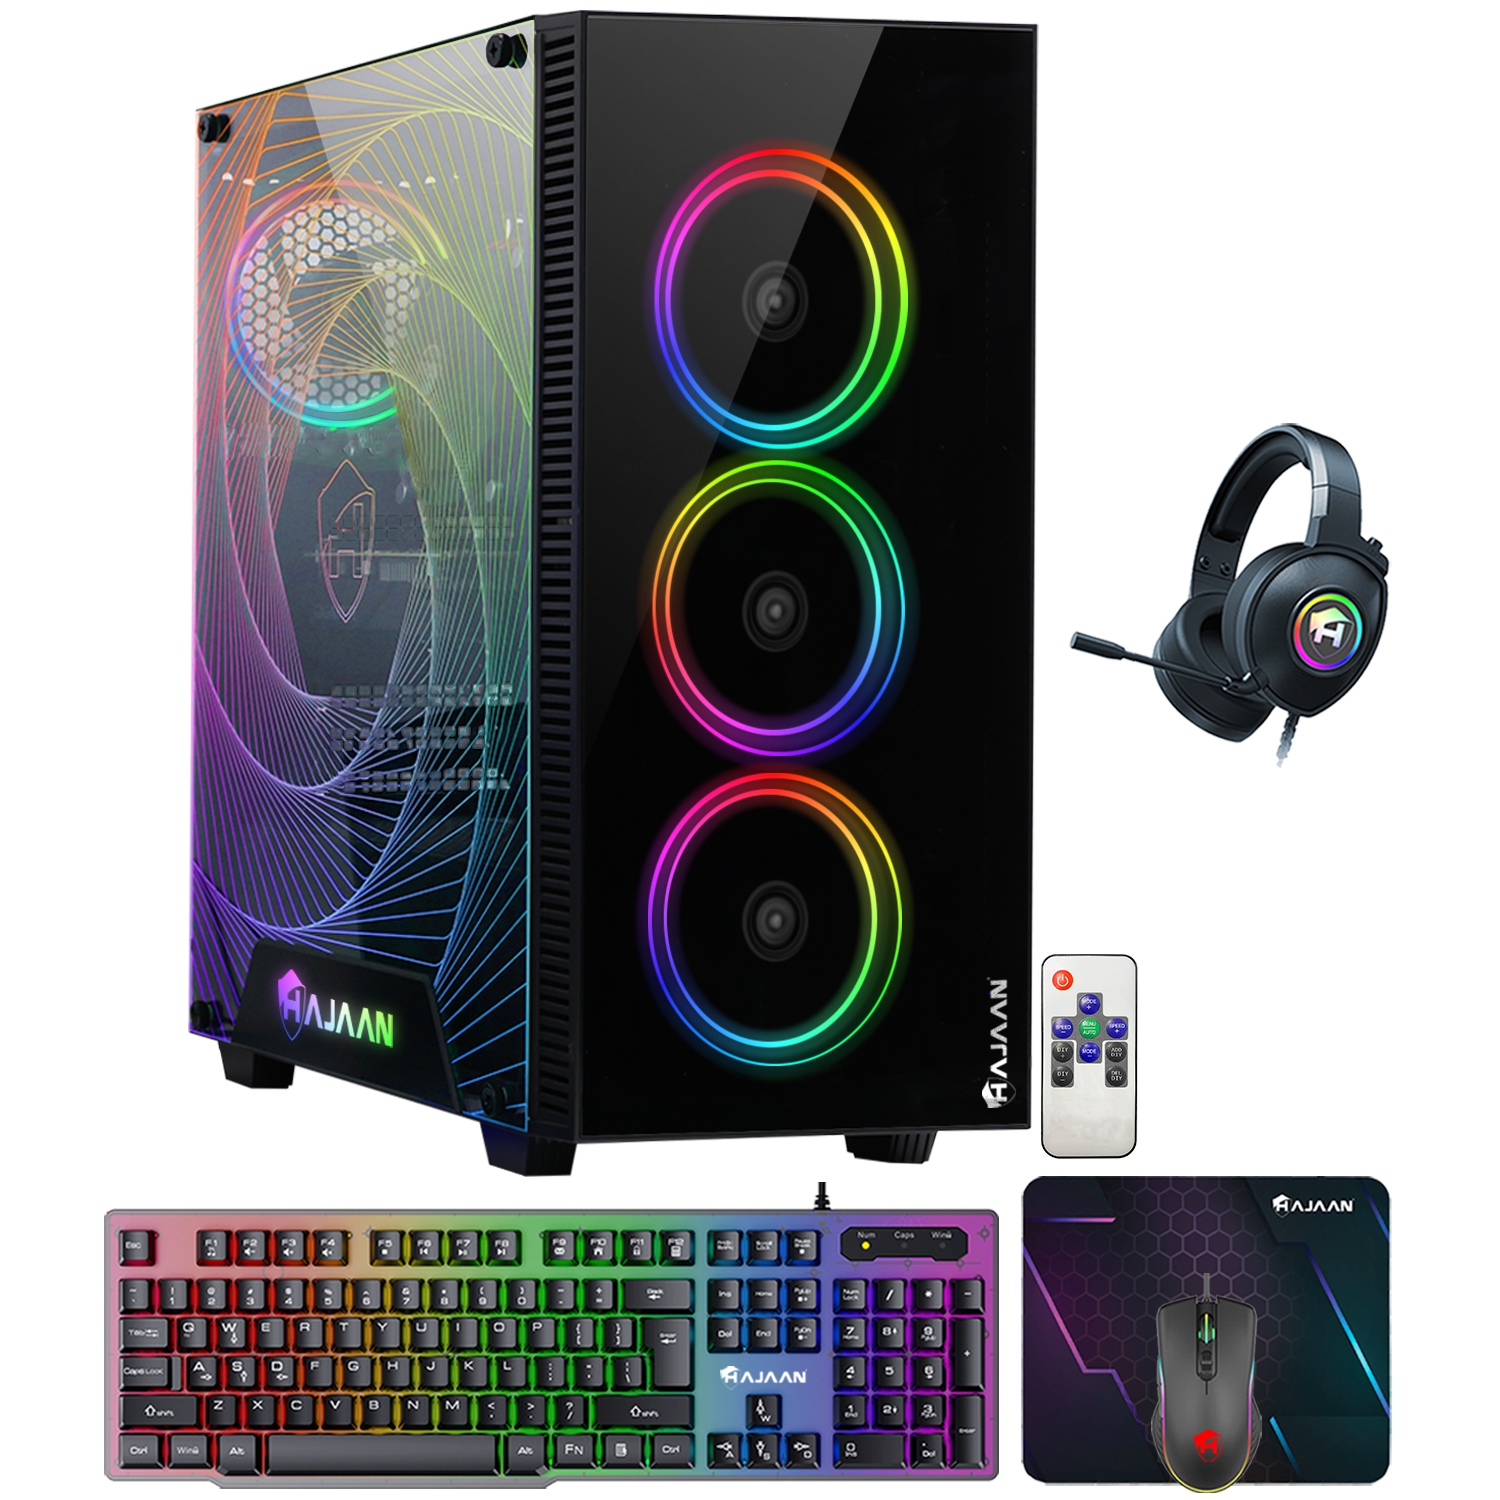 HAJAAN CYCLONIA Gaming Tower Computer Desktop PC - AMD Ryzen 5 5600G Processor Up to 4.4GHz - RTX 3070 8GB GDDR6 - 32GB DDR4 - 1TB SSD - Windows 11 Pro - Keyboard Mouse and Headset